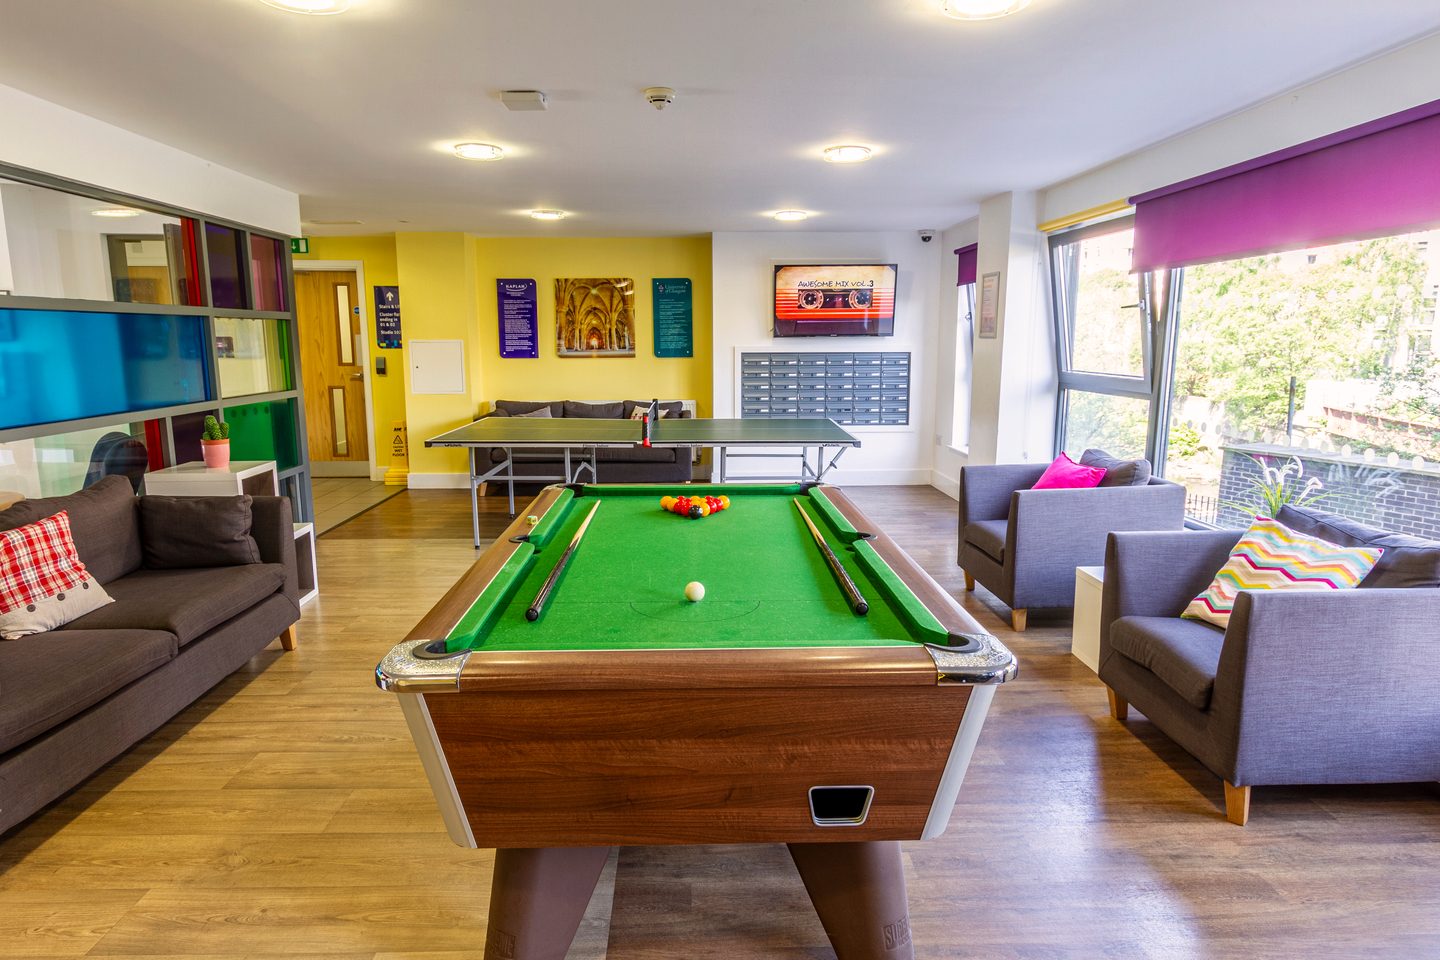 Game room with a pool table, a table tennis with a sofa and two armchairs